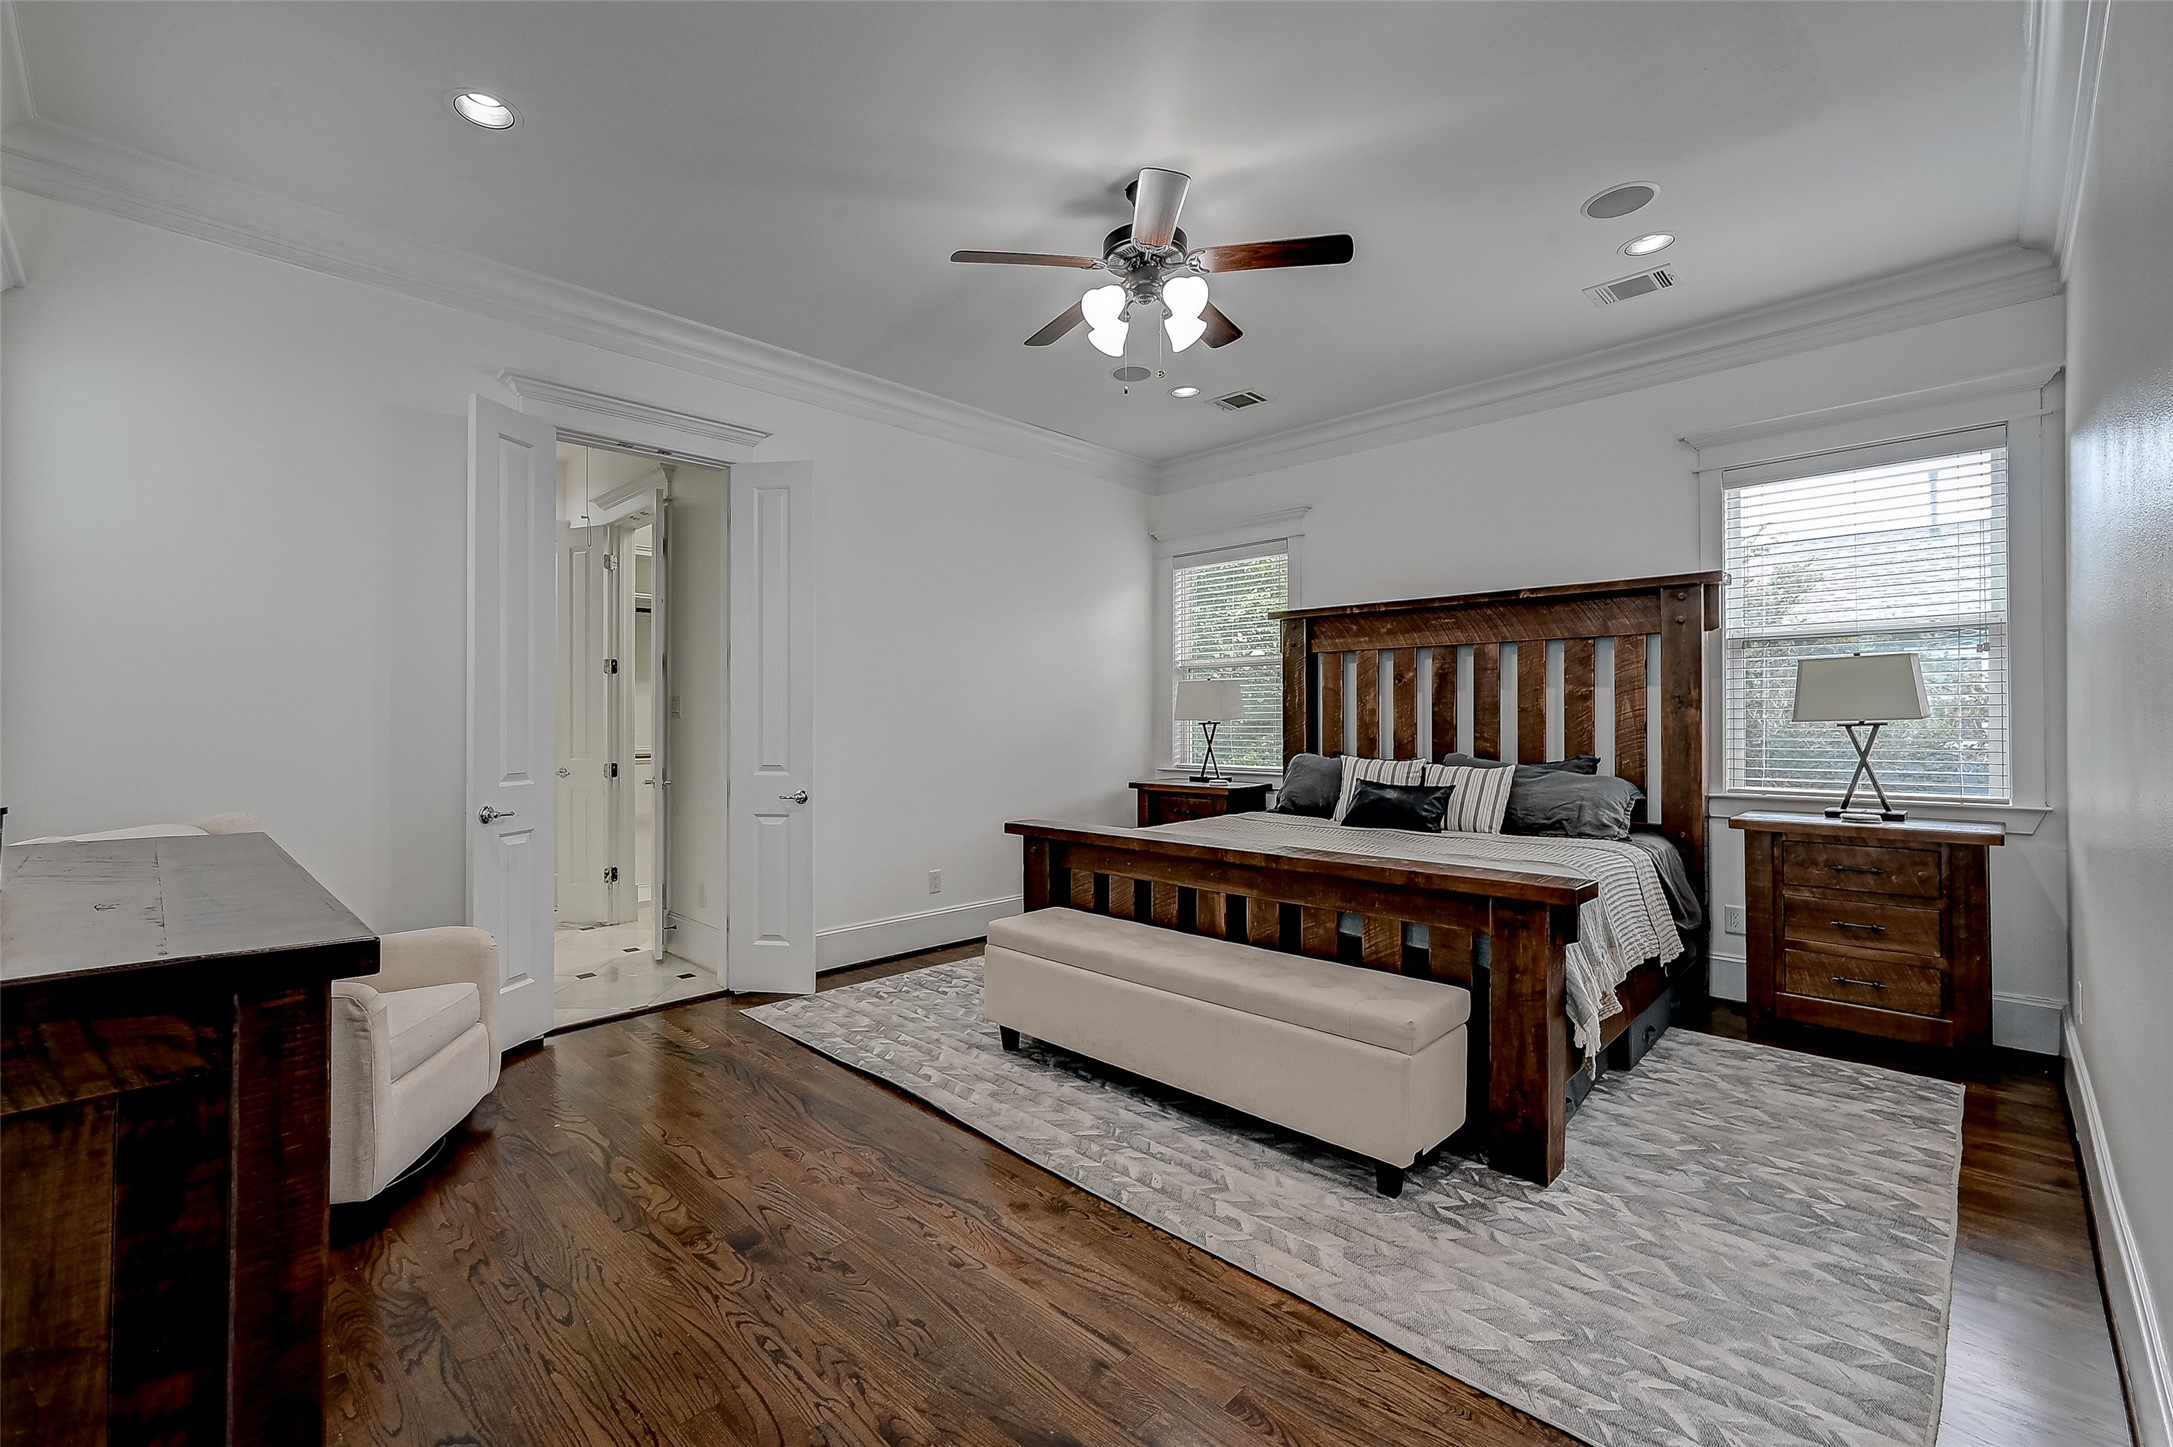 The primary bedroom is a sanctuary of luxury, featuring warm hardwood floors that offer a touch of comfort underfoot. High ceilings create an expansive atmosphere, while generous windows welcome abundant natural light.